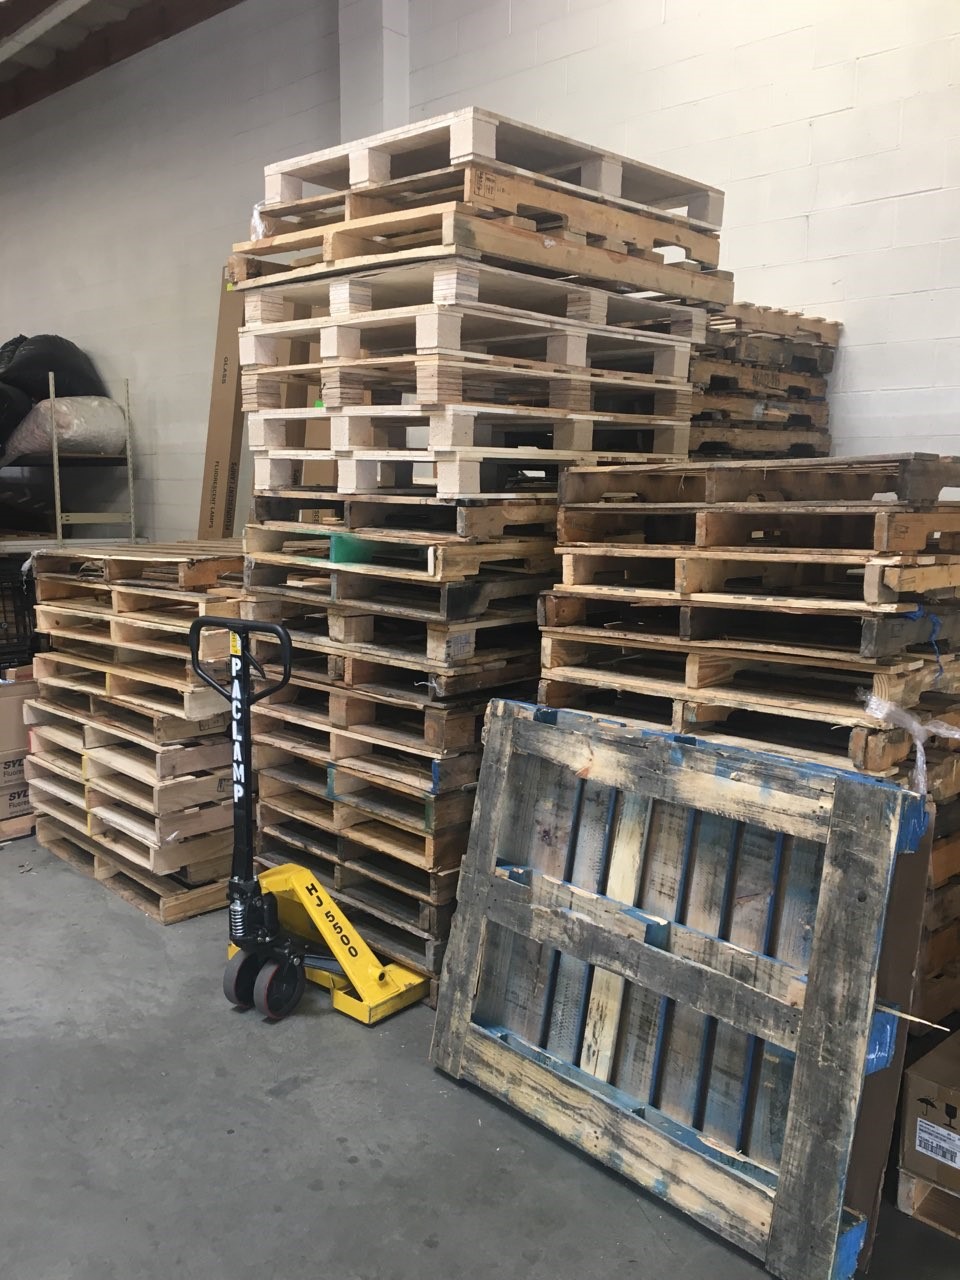 Stacks of pallets - Repalletize